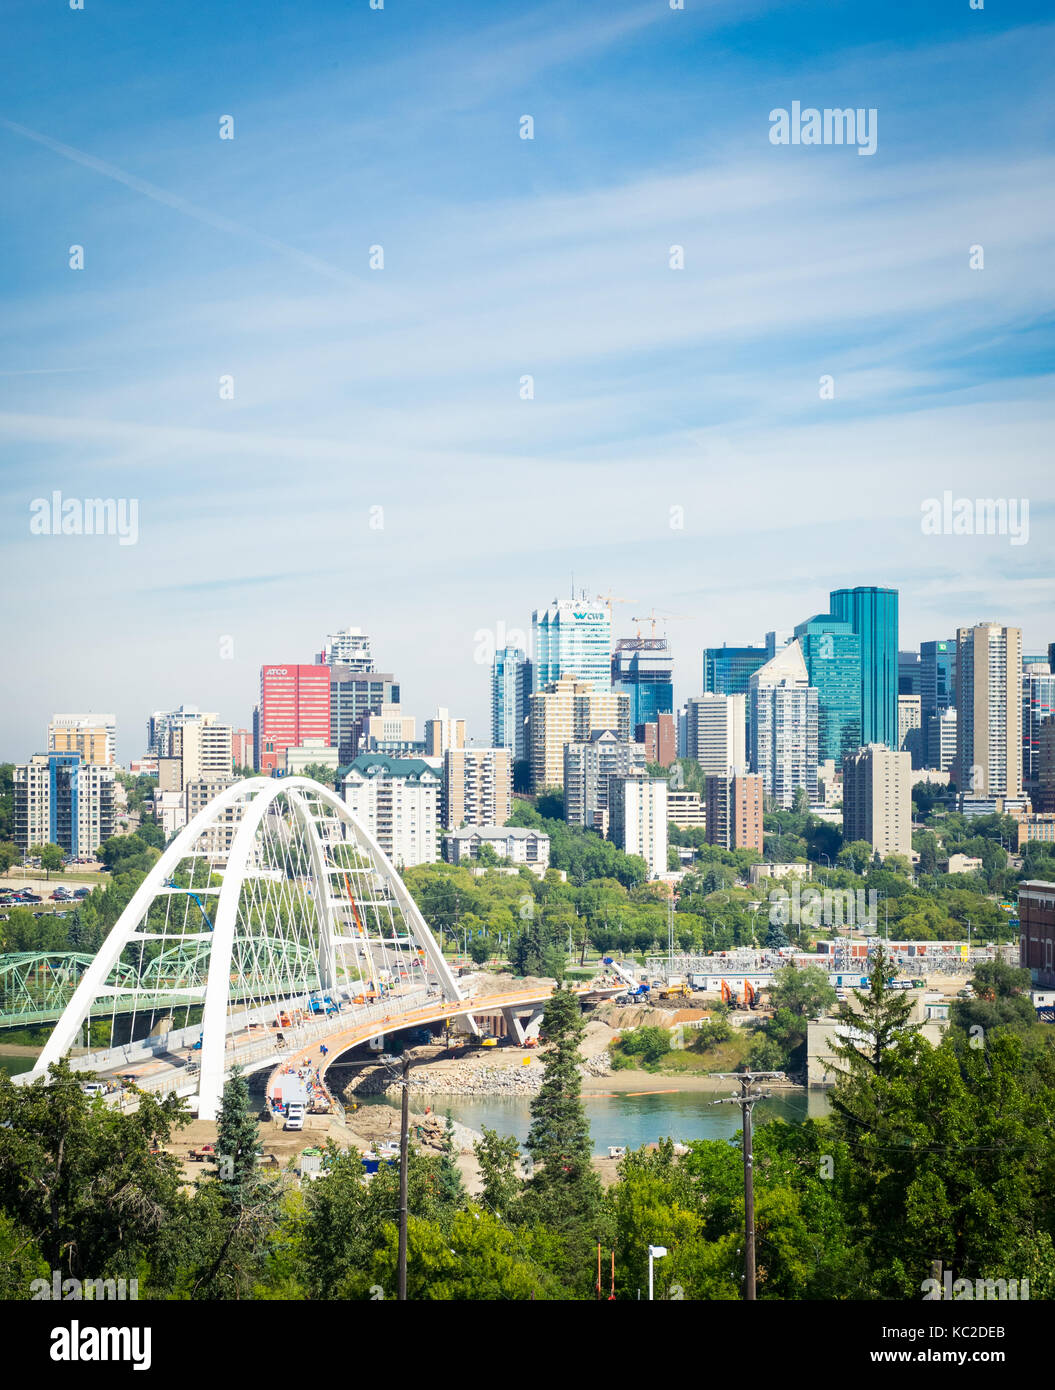 A view of the new Walterdale Bridge and the skyline of Edmonton, Alberta, Canada. Stock Photo